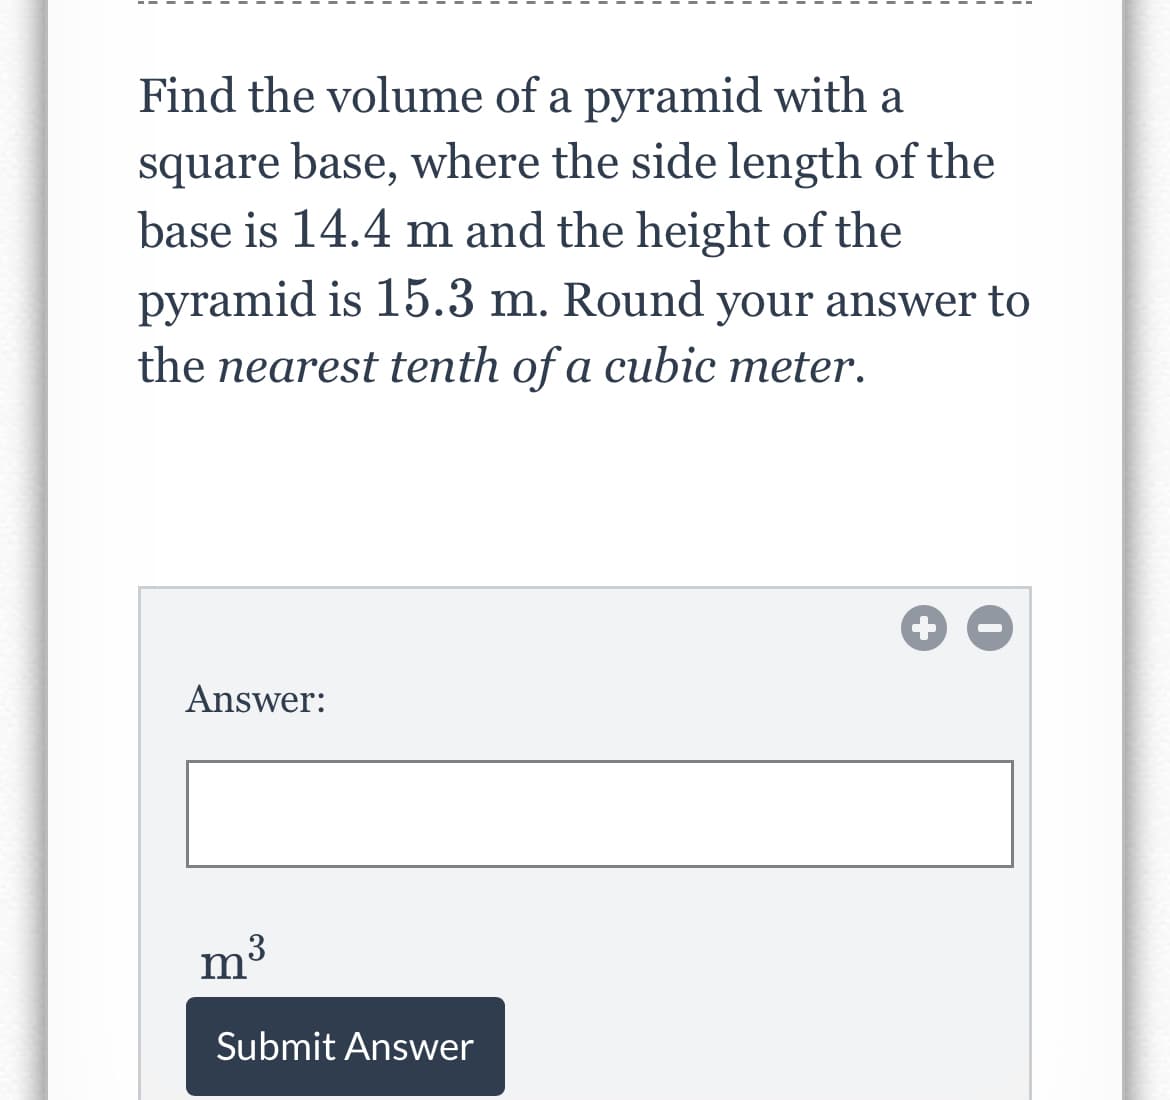 Find the volume of a pyramid with a
square base, where the side length of the
base is 14.4 m and the height of the
pyramid is 15.3 m. Round your answer to
the nearest tenth of a cubic meter.
Answer:
m3
Submit Answer
